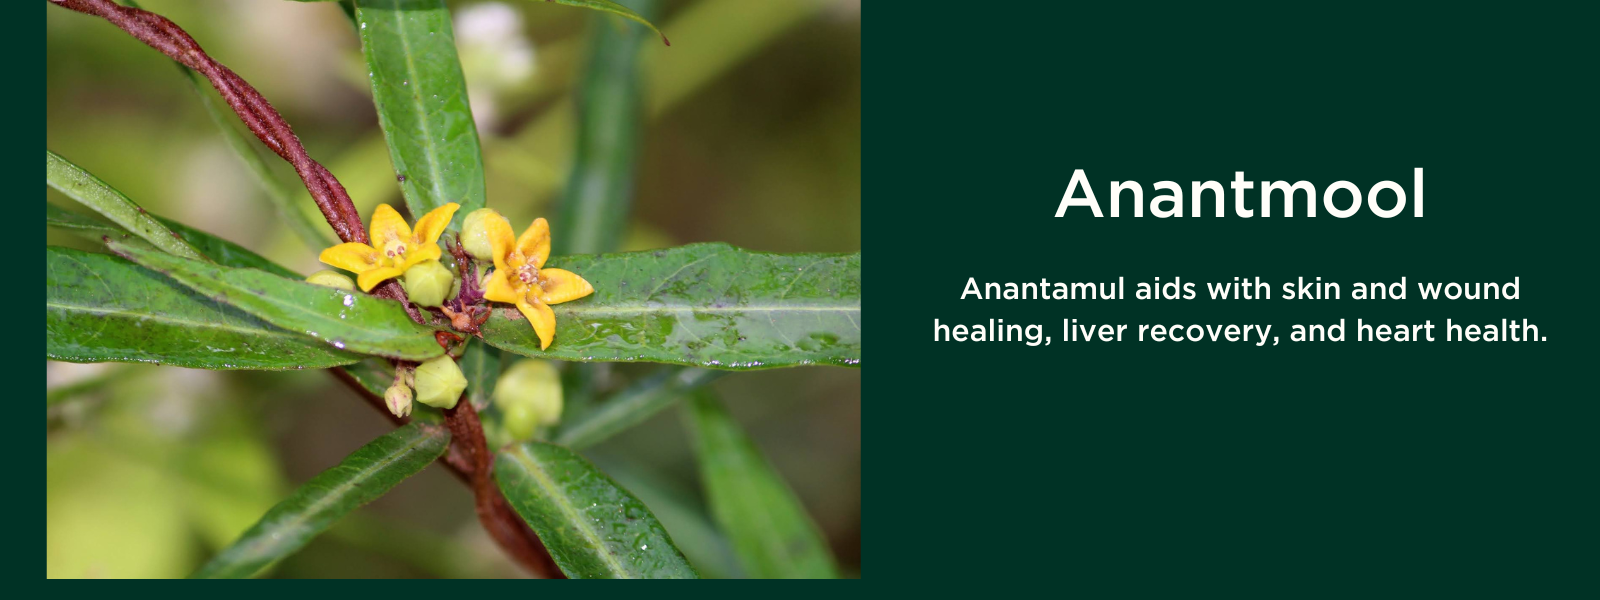 Anantmool- Health Benefits, Uses and Important Facts